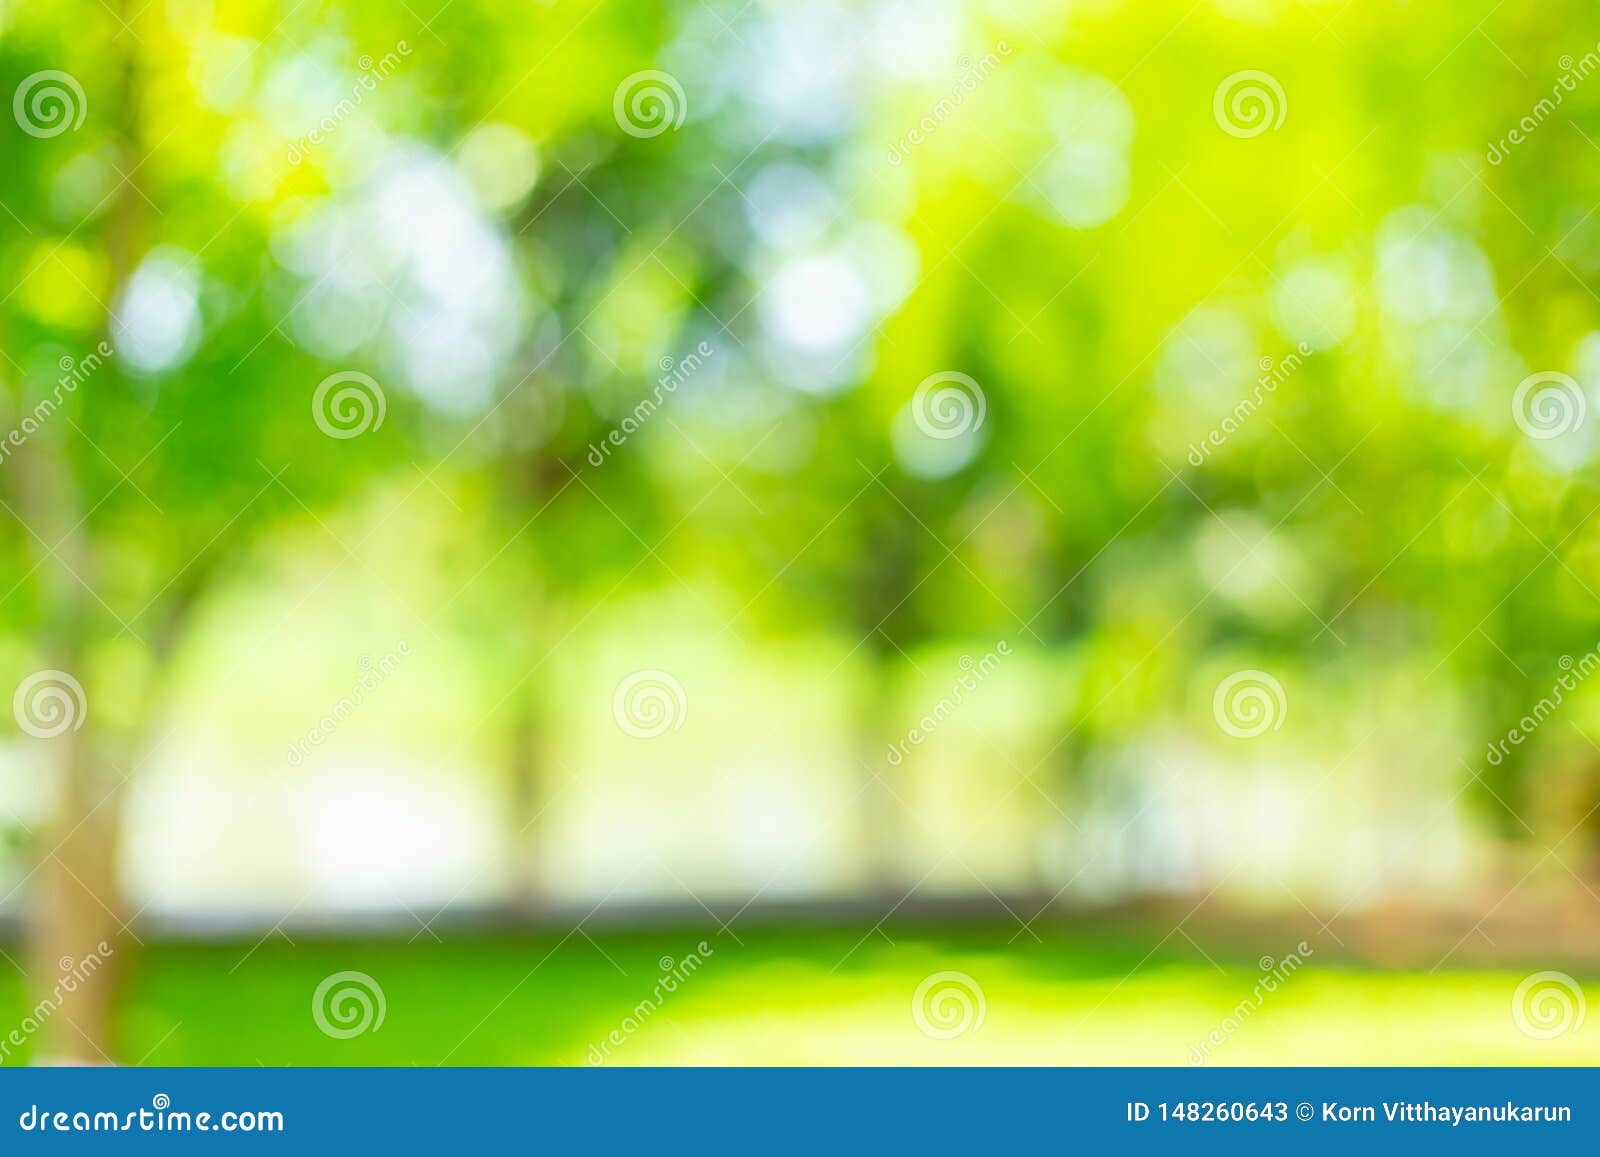 Blur Green Tree Outdoor Park Garden Abstract Stock Image - Image of green,  botany: 148260643